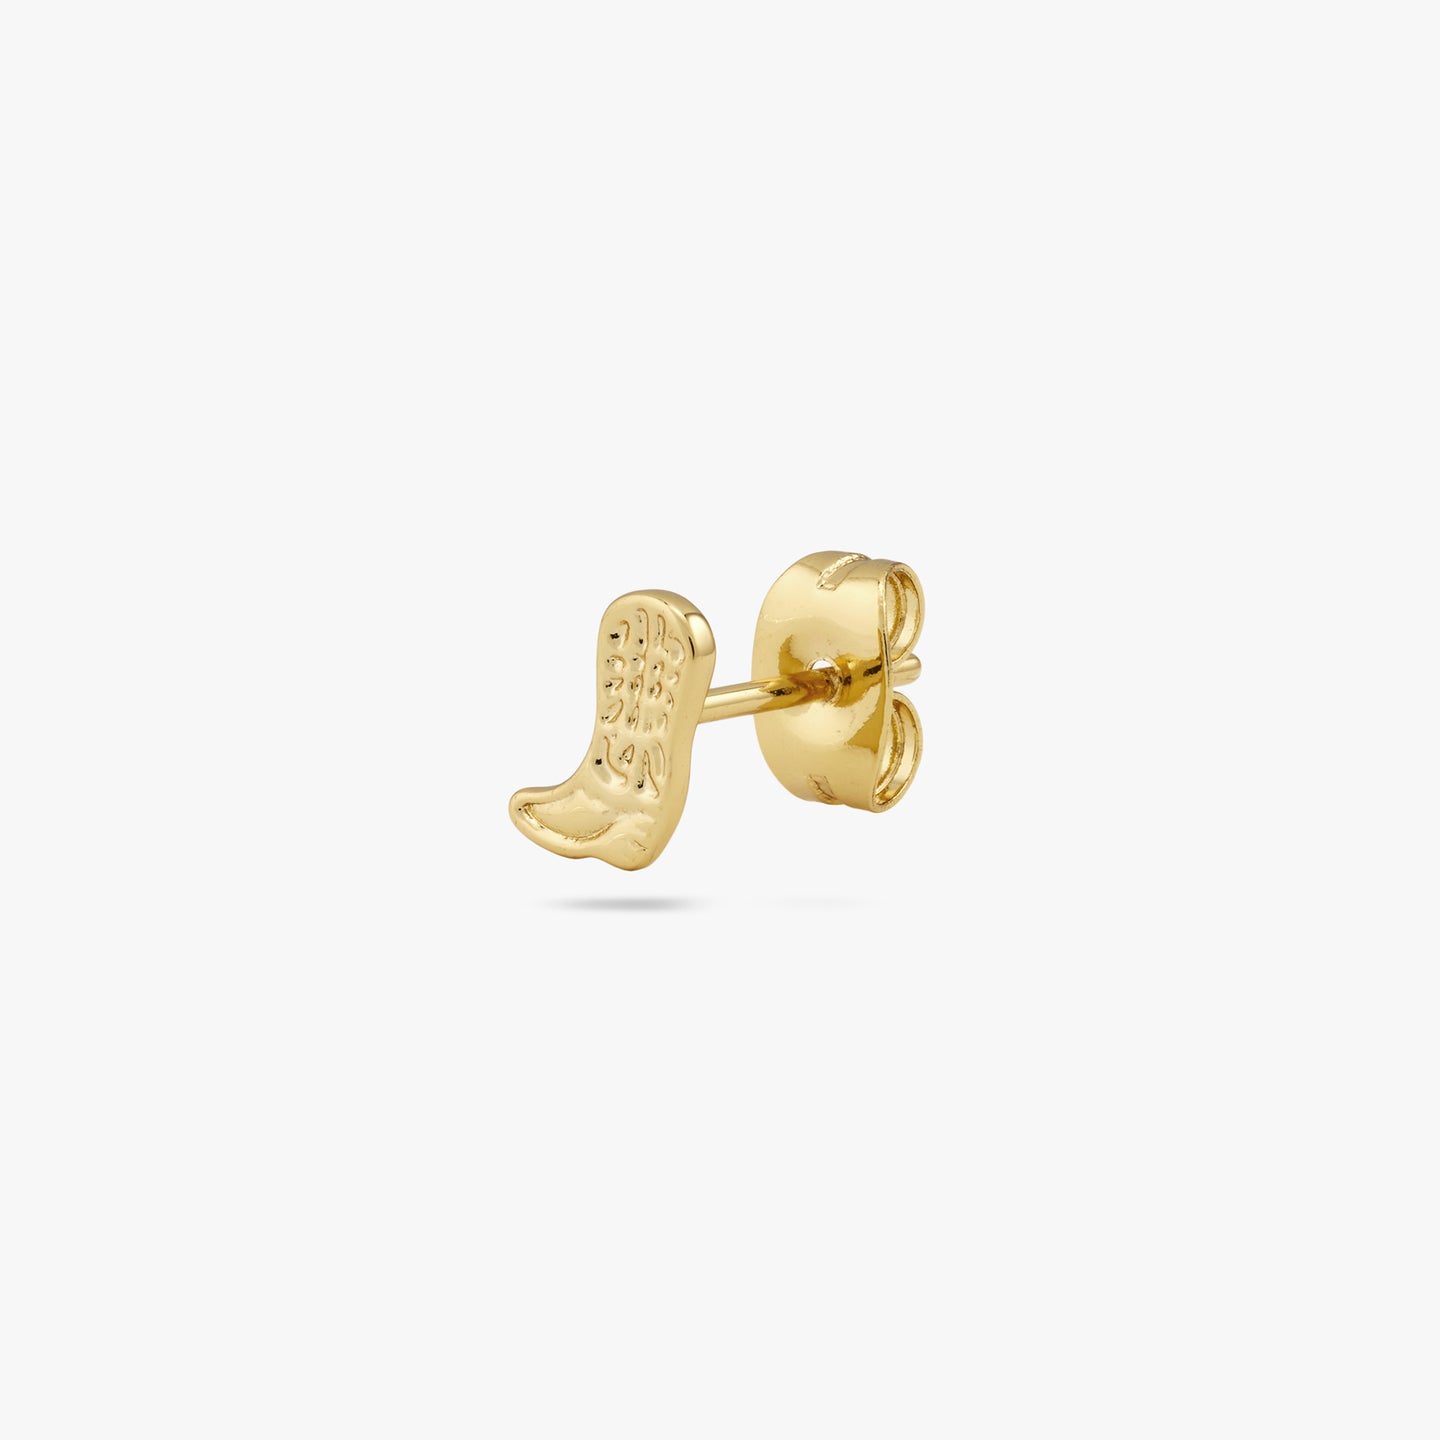 This is a small gold cowboy boot shaped stud with detailing color:null|gold